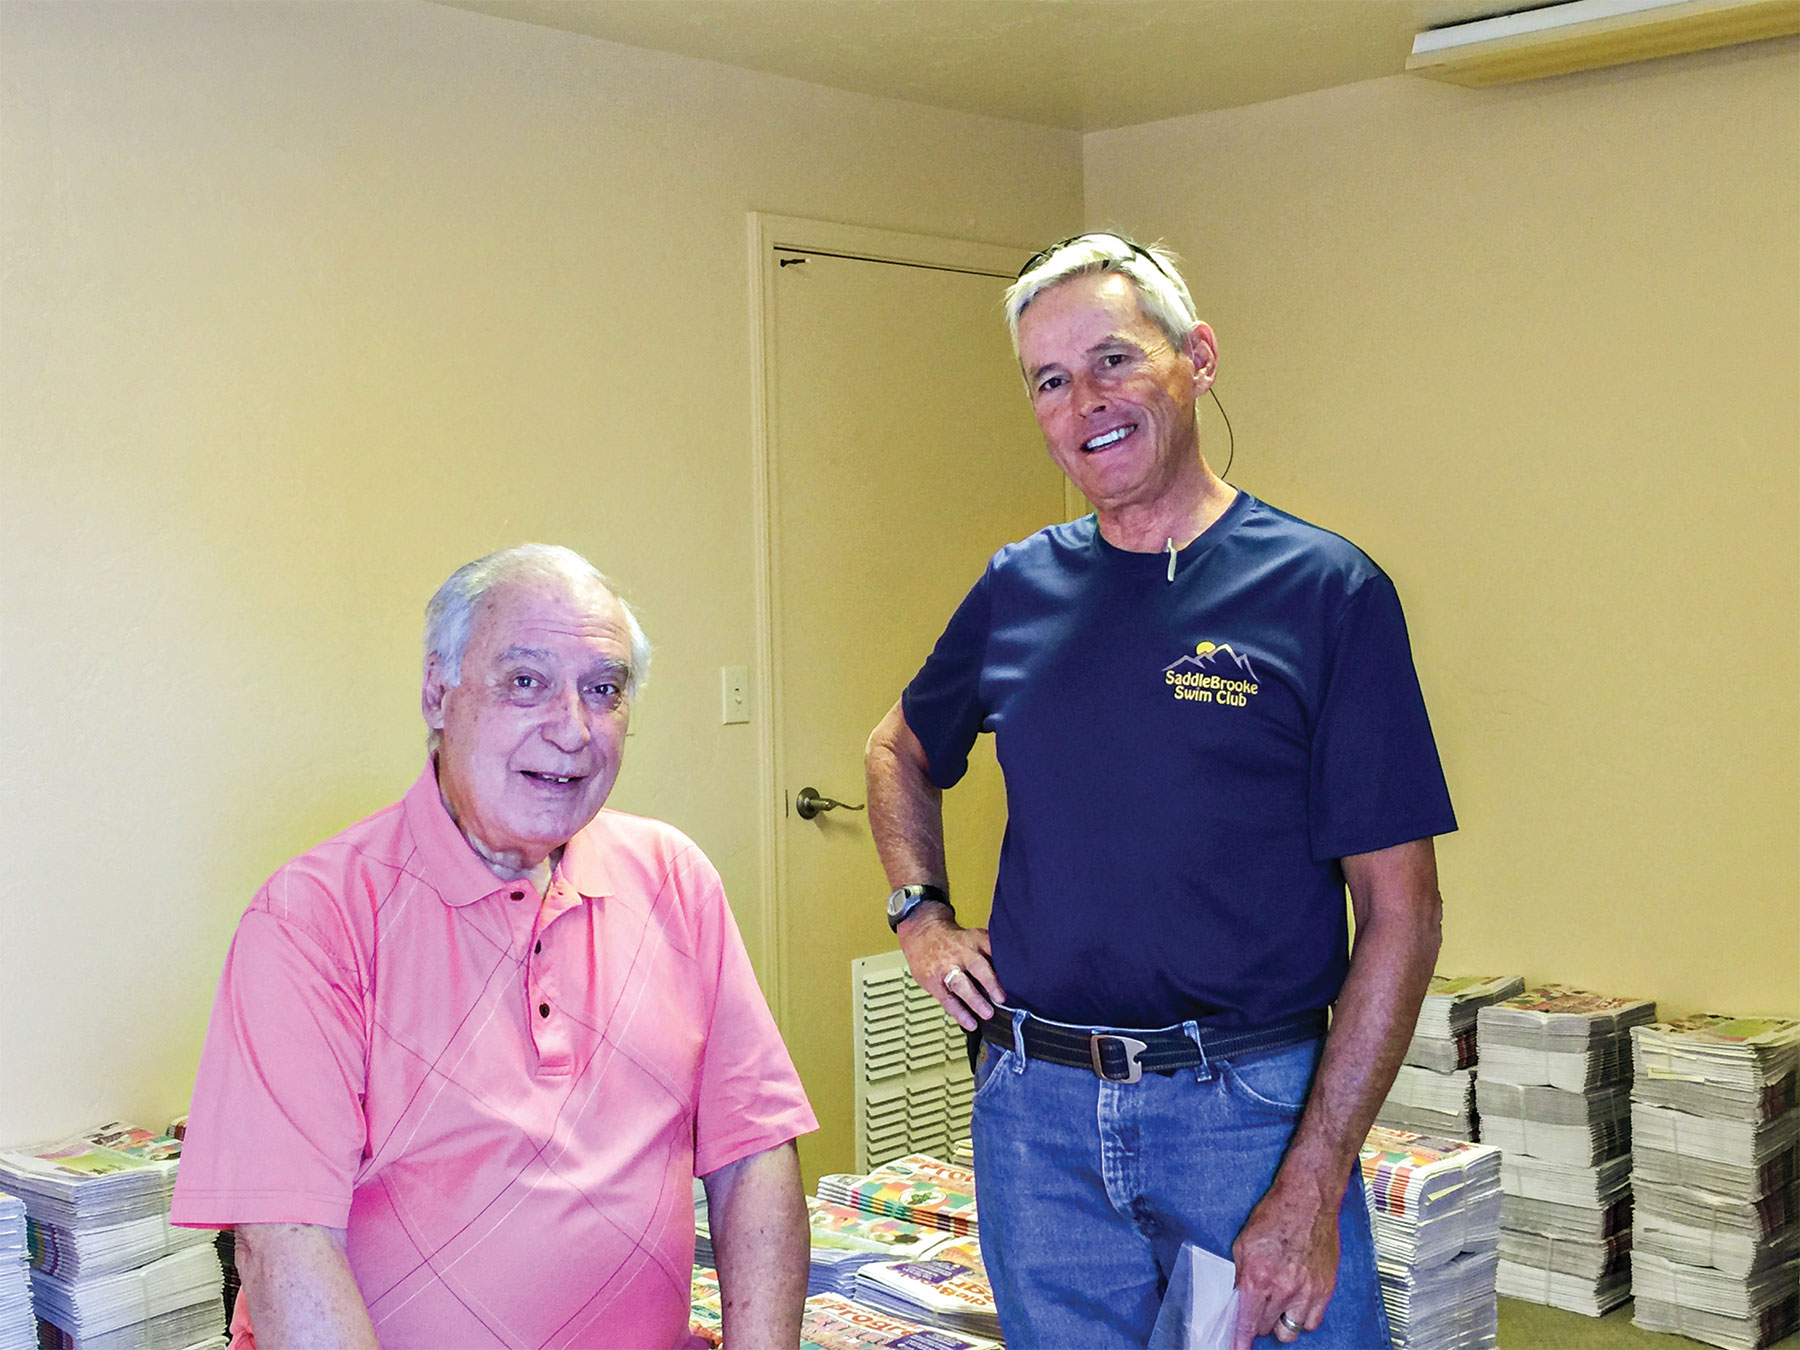 Ed Betanzos (left) and Jeff Eighmy rest after bundling the October issue of the SaddleBrooke Progress; photo by Bob Lamb. Monthly delivery of the Progress is a service project of the SaddleBrooke CycleMasters. About 5,000 newspapers are received monthly from the printer. Ed coordinates scheduling of delivery people. Jeff separates the papers into bundles by delivery route, which are neighborhood units. Later, 30 persons will arrive here to collect papers for their assigned routes. The delivery people will devote one or two hours each month